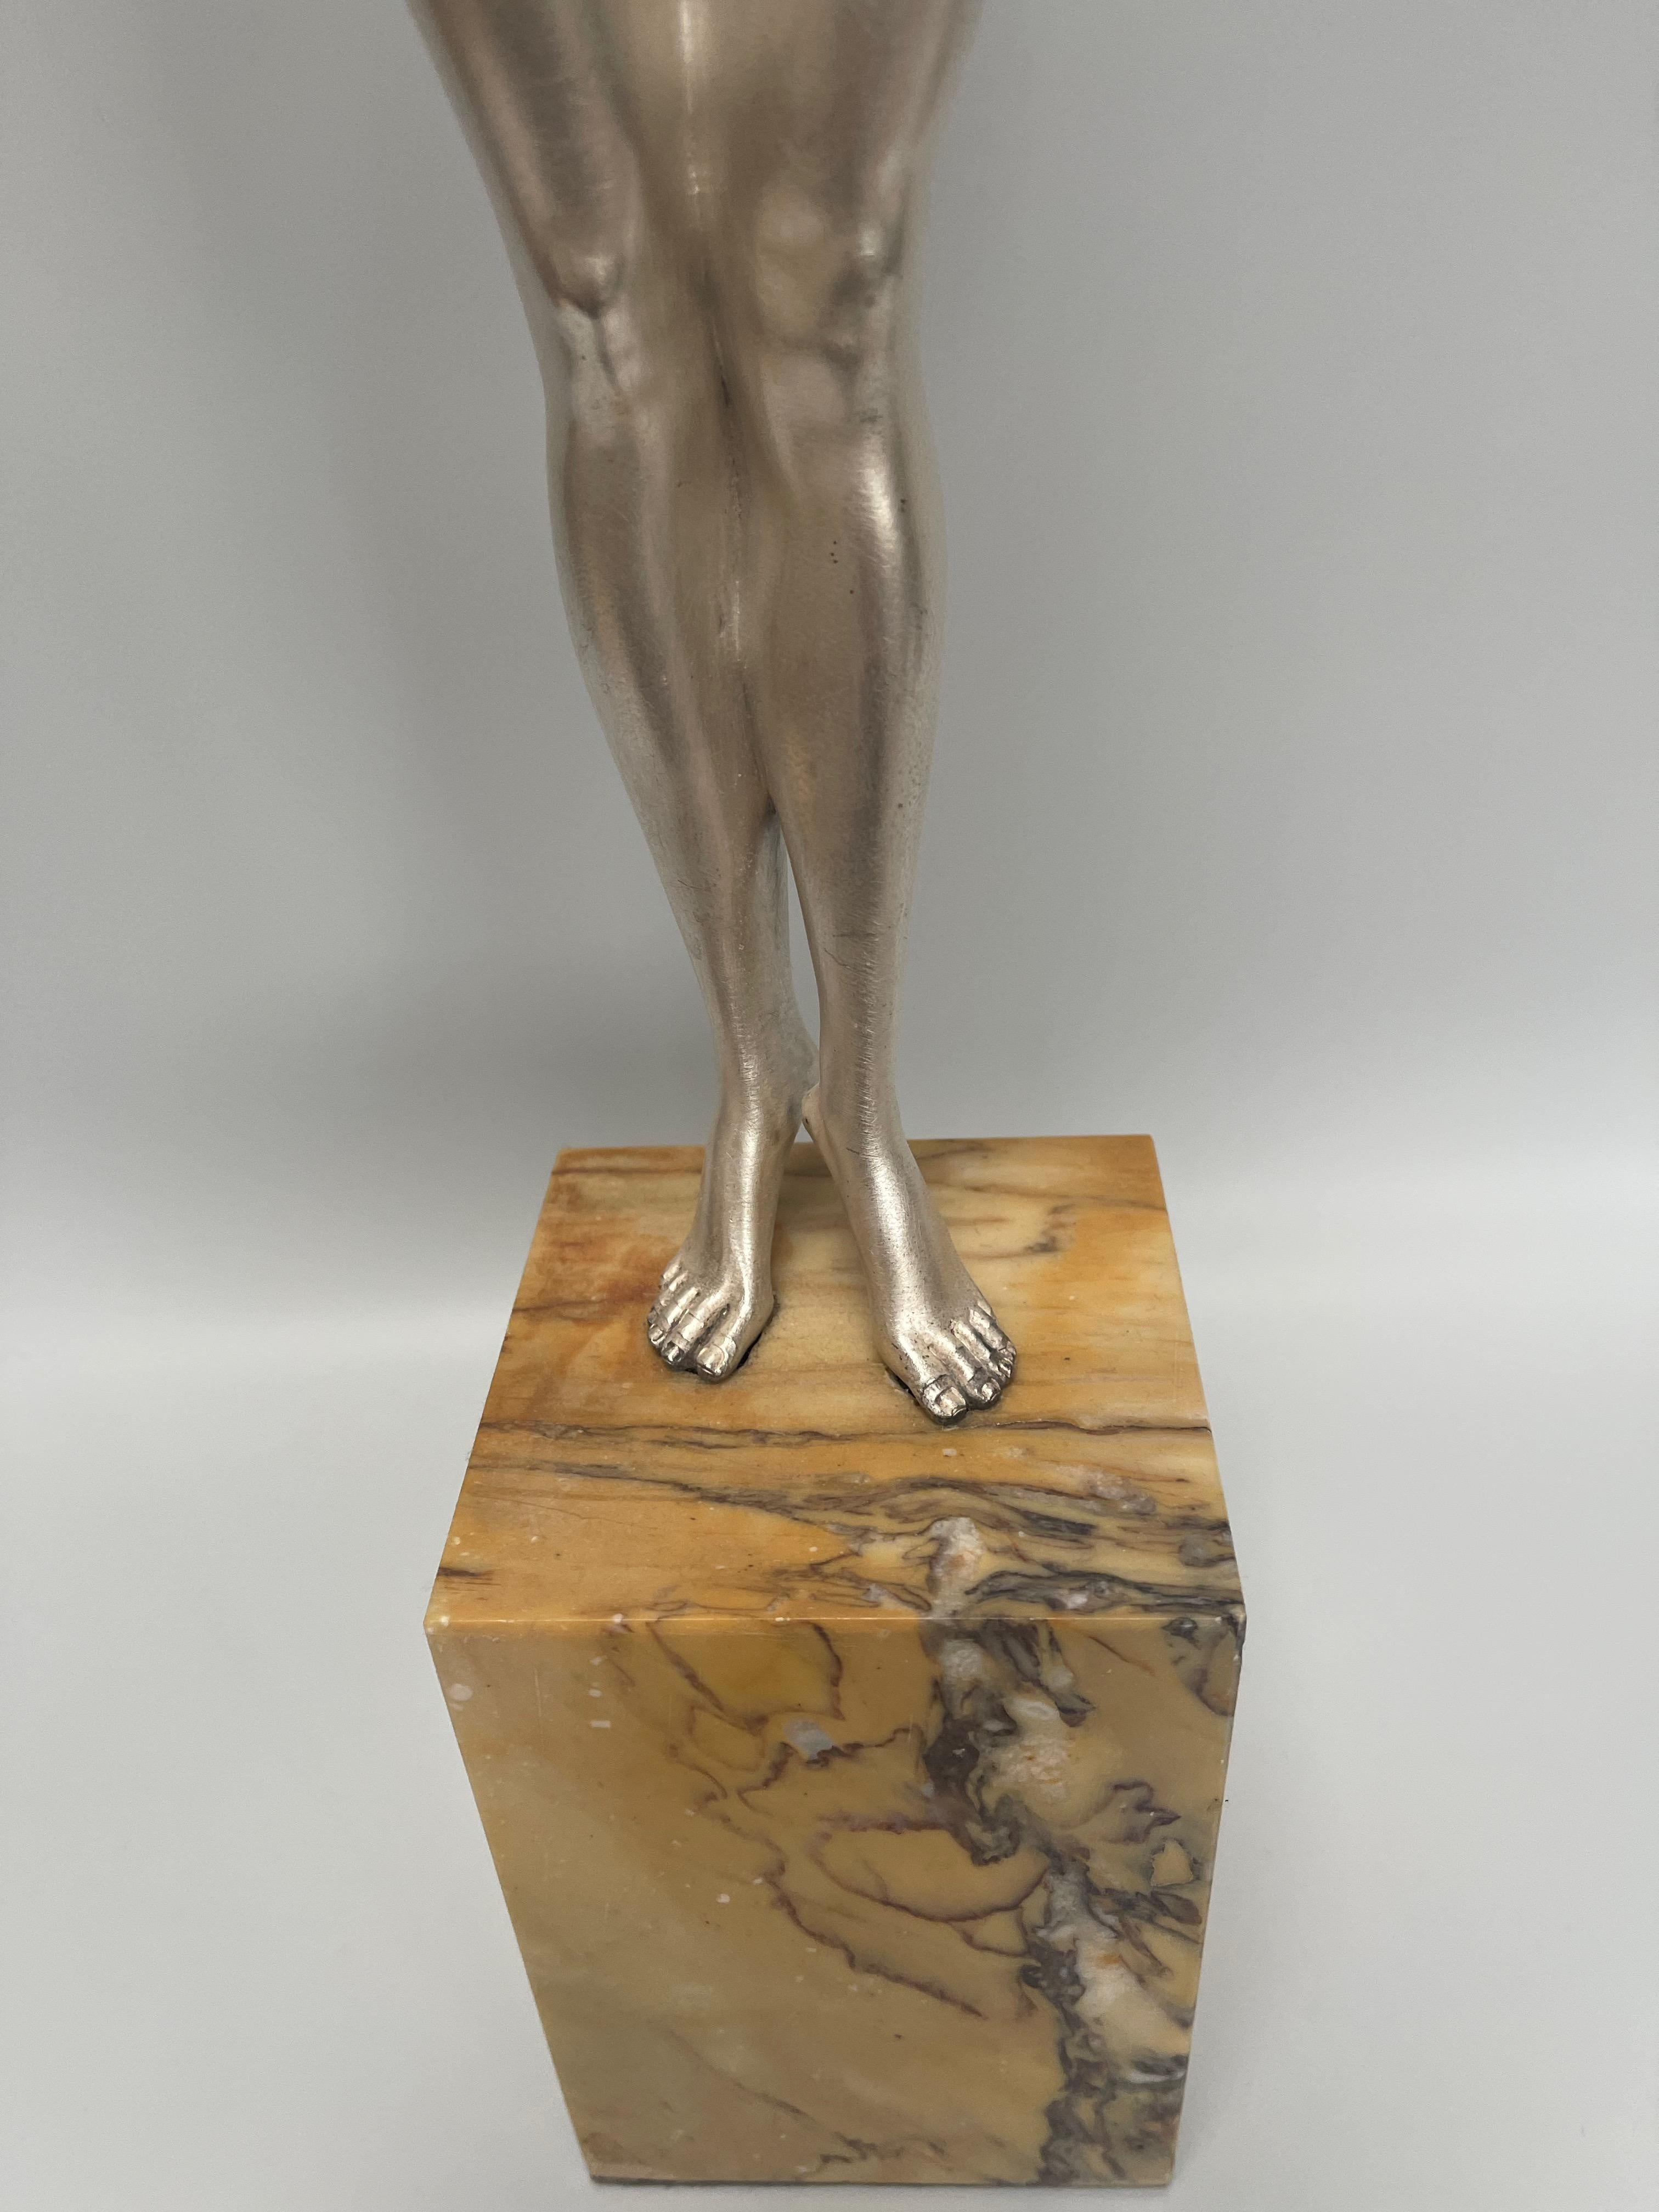 Awakening Art Deco Sculpture by Paul Philippe For Sale 7